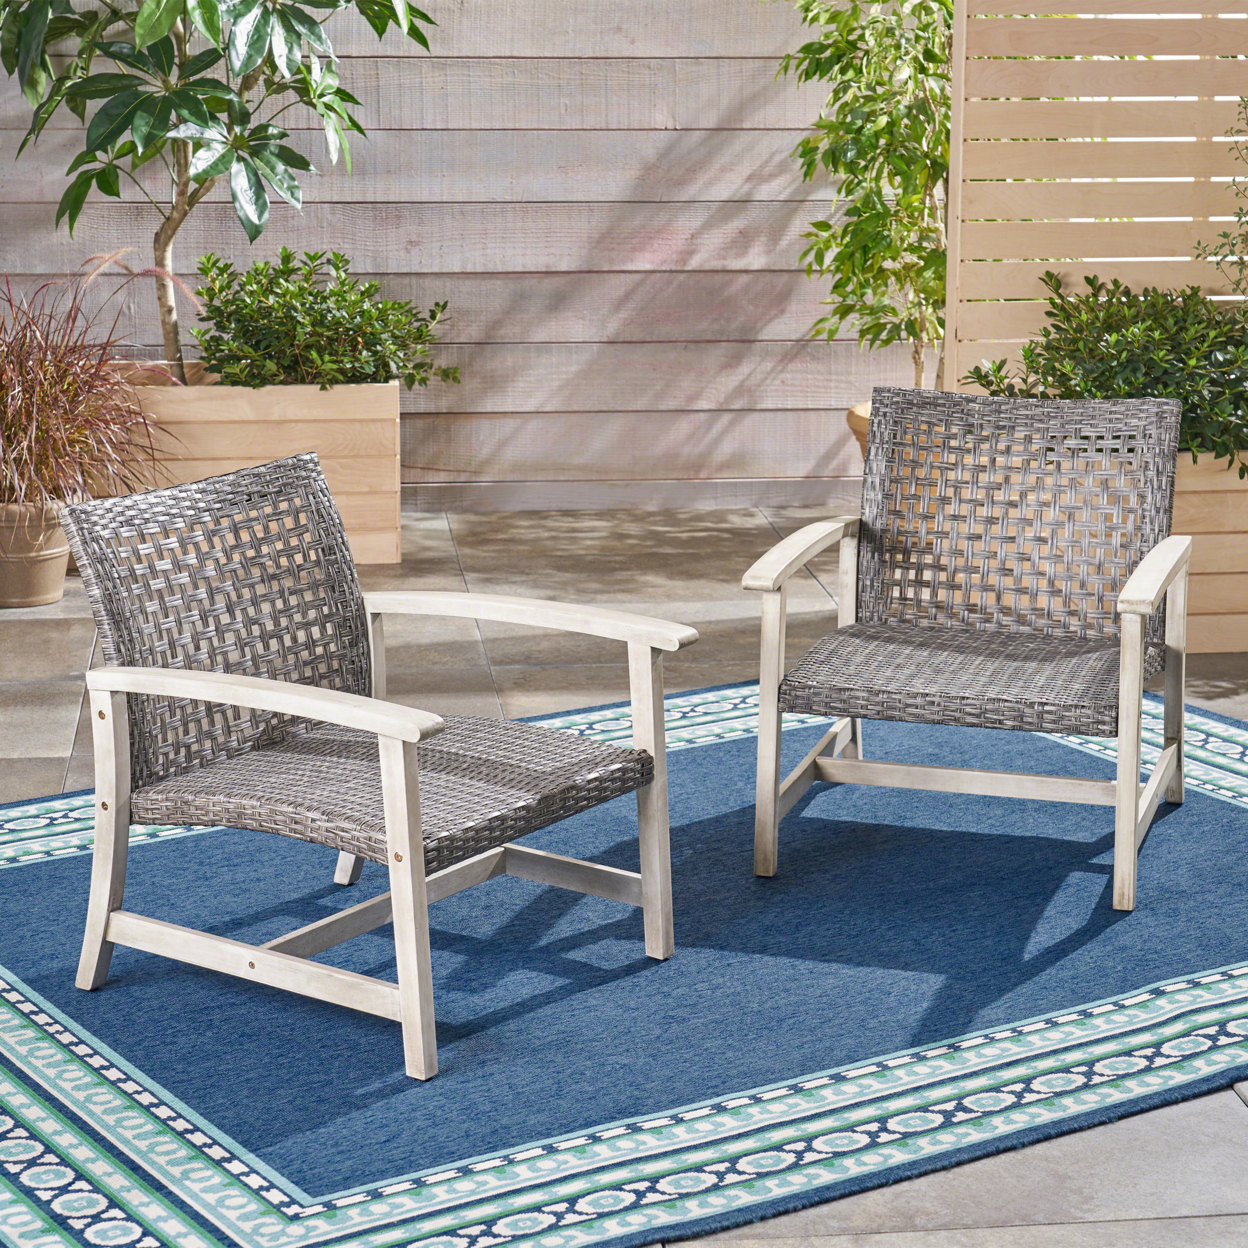 Viola Outdoor Wood And Wicker Club Chairs - Teak Finish + Mixed Mocha, Set Of 4